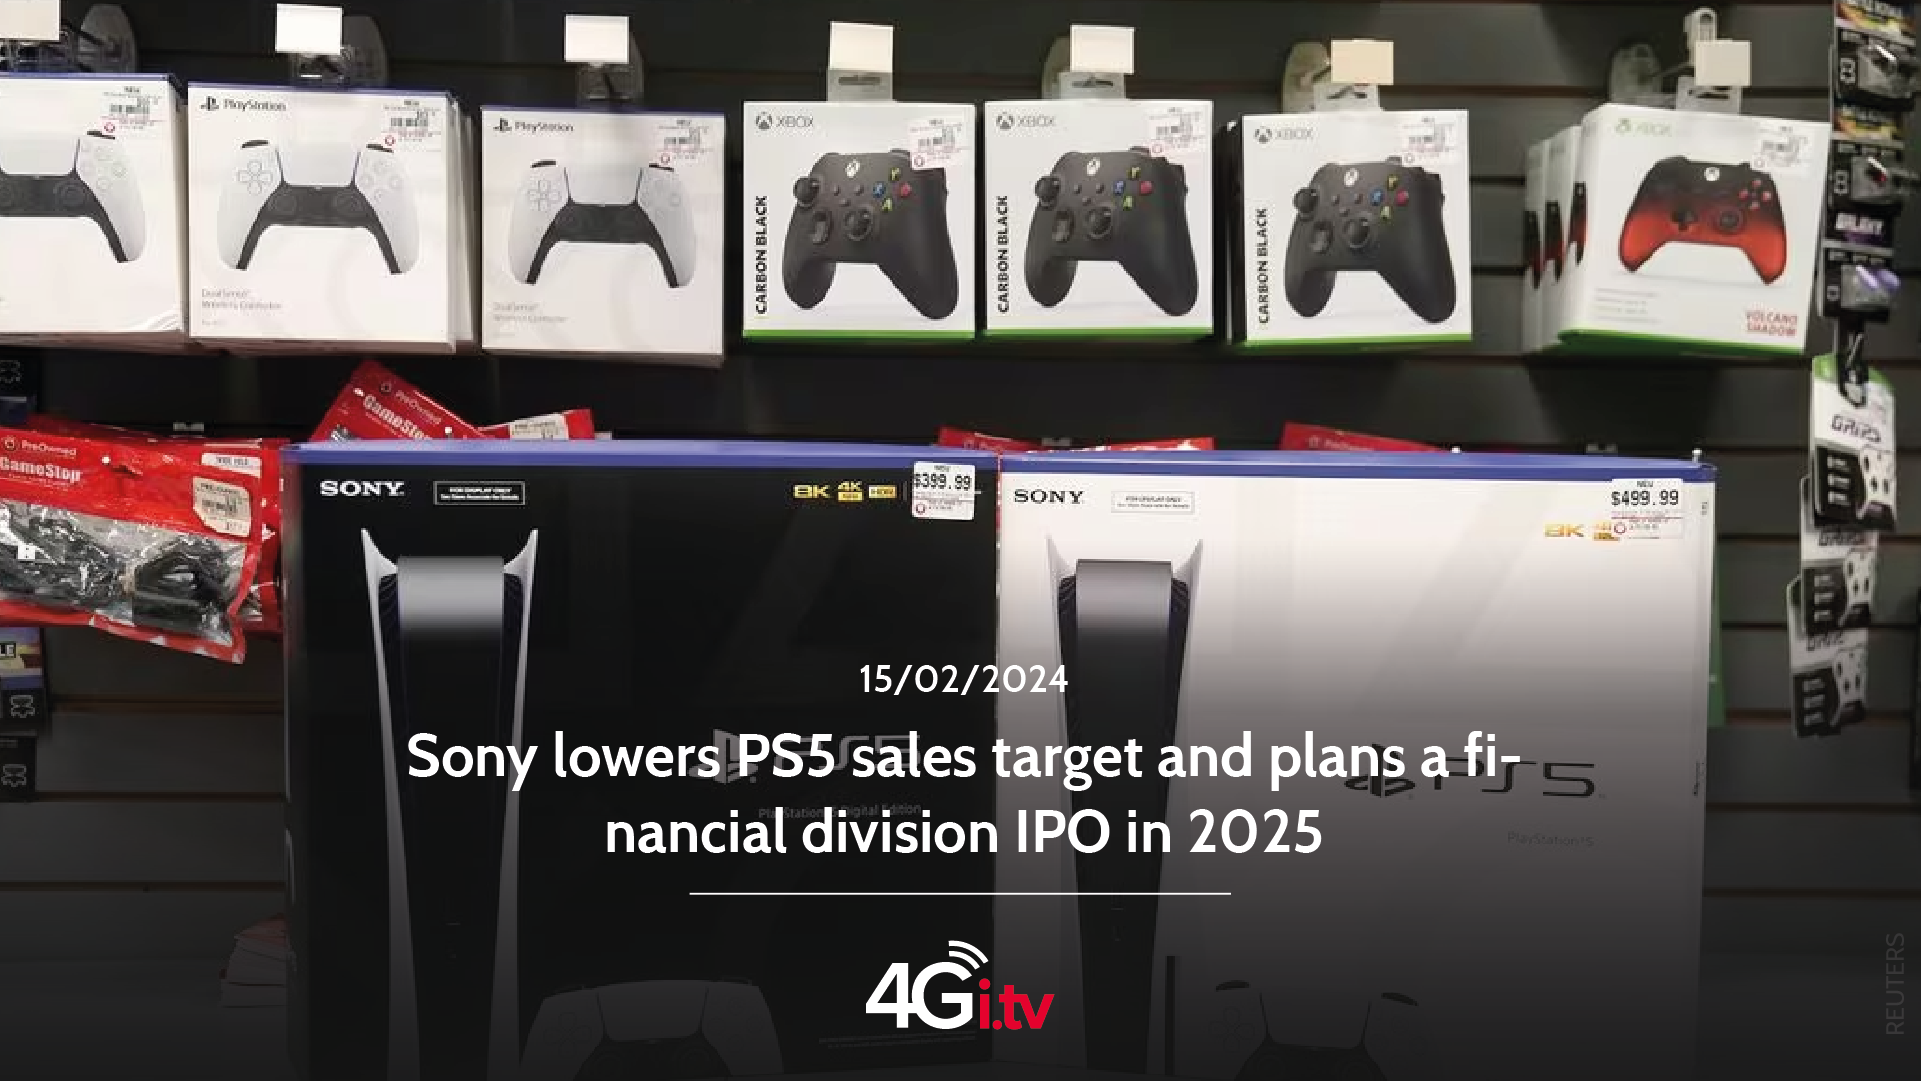 Read more about the article Sony lowers PS5 sales target and plans a financial division IPO in 2025 